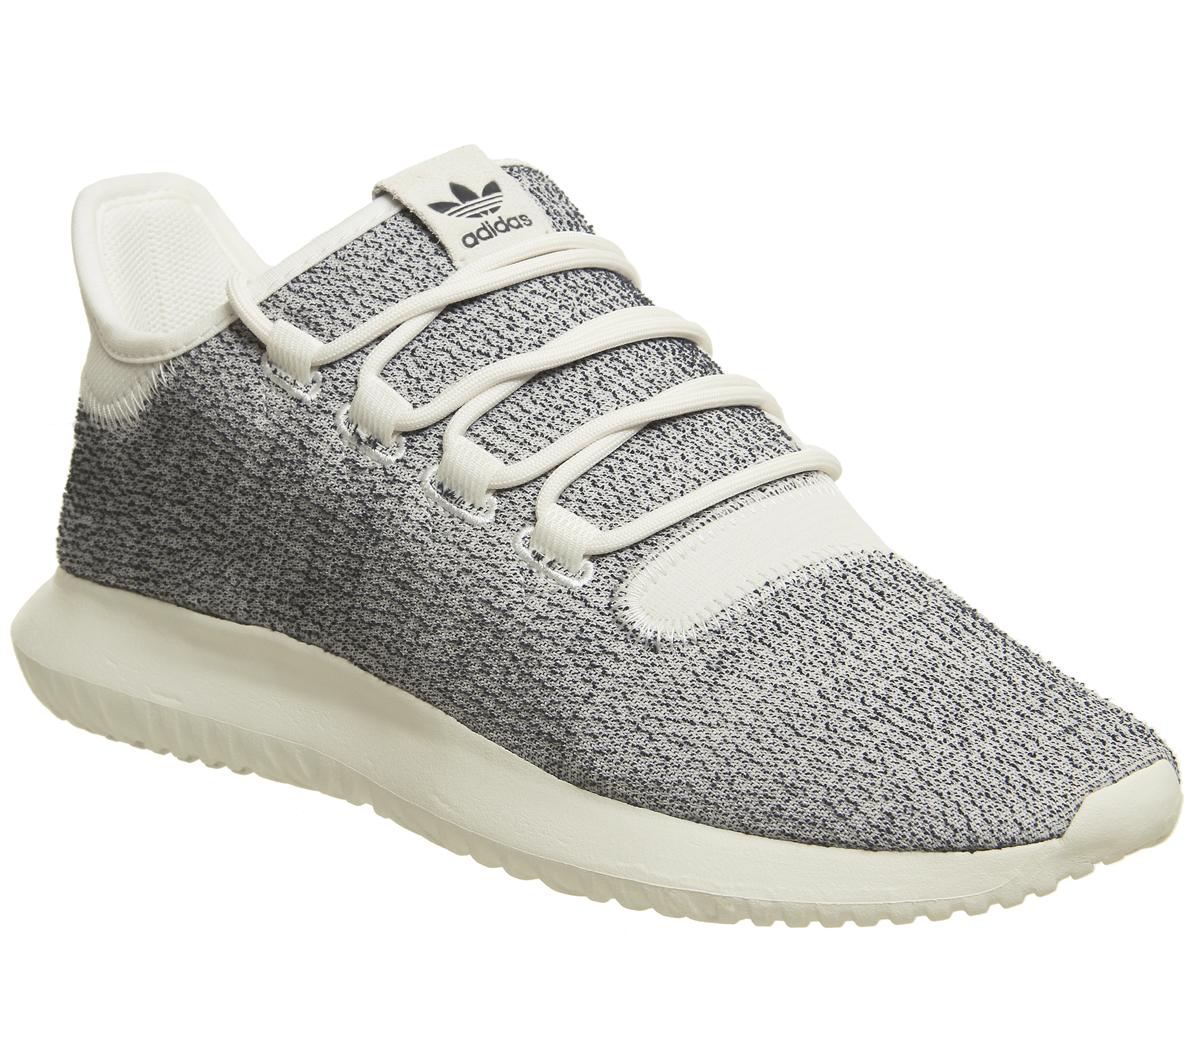 adidas Tubular Shadow Off White - Hers trainers